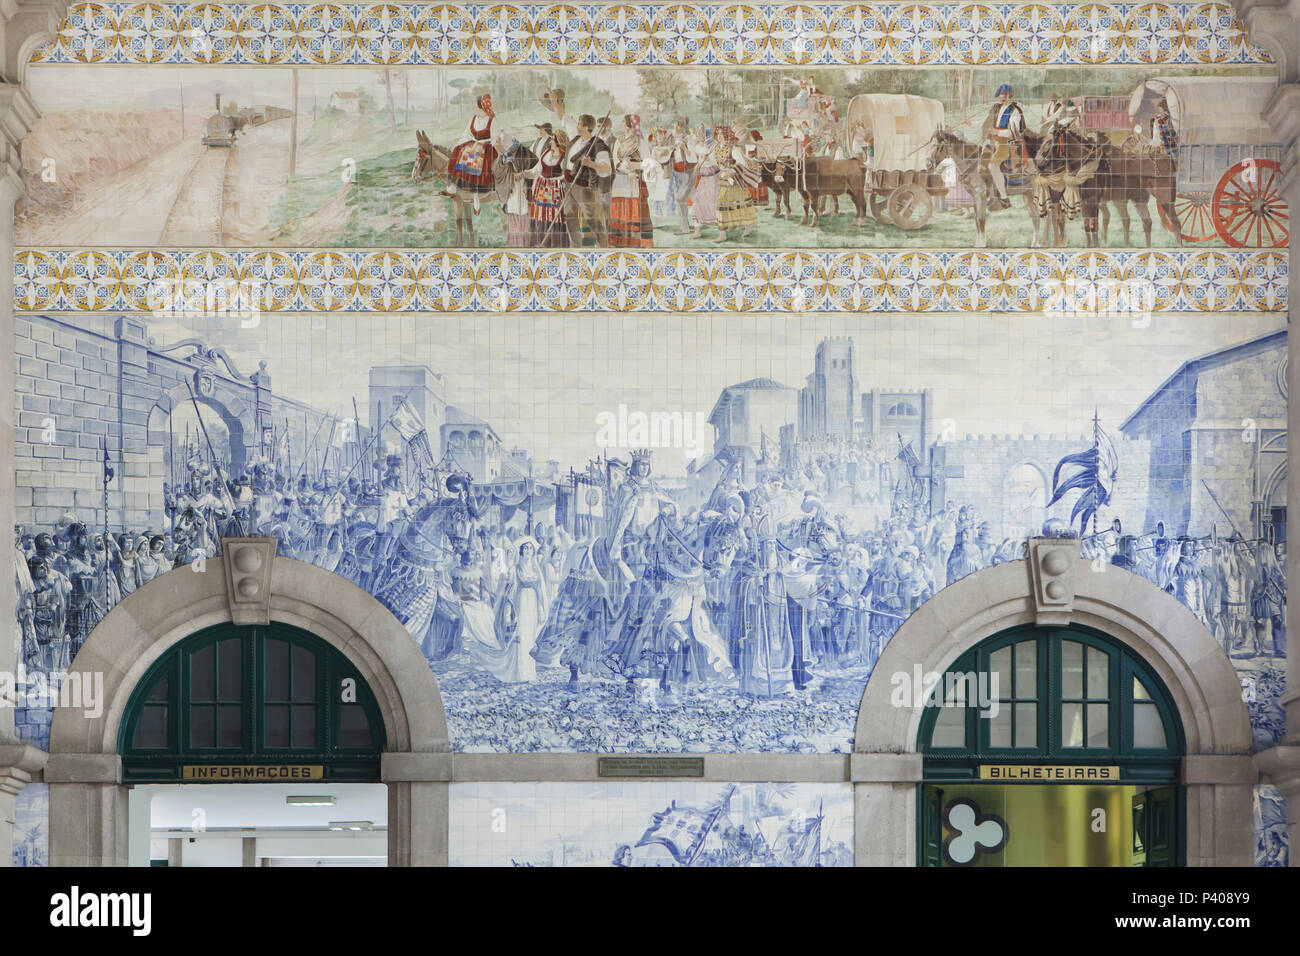 Entrance to Porto of King John I of Portugal (also known as João I) and Queen Philippa of Lancaster to celebrate their wedding in 1387. Azulejo panel painted by Portuguese painter Jorge Colaço in 1905-1916 in the São Bento railway station (Estação Ferroviária de São Bento) in Porto, Portugal. Stock Photo